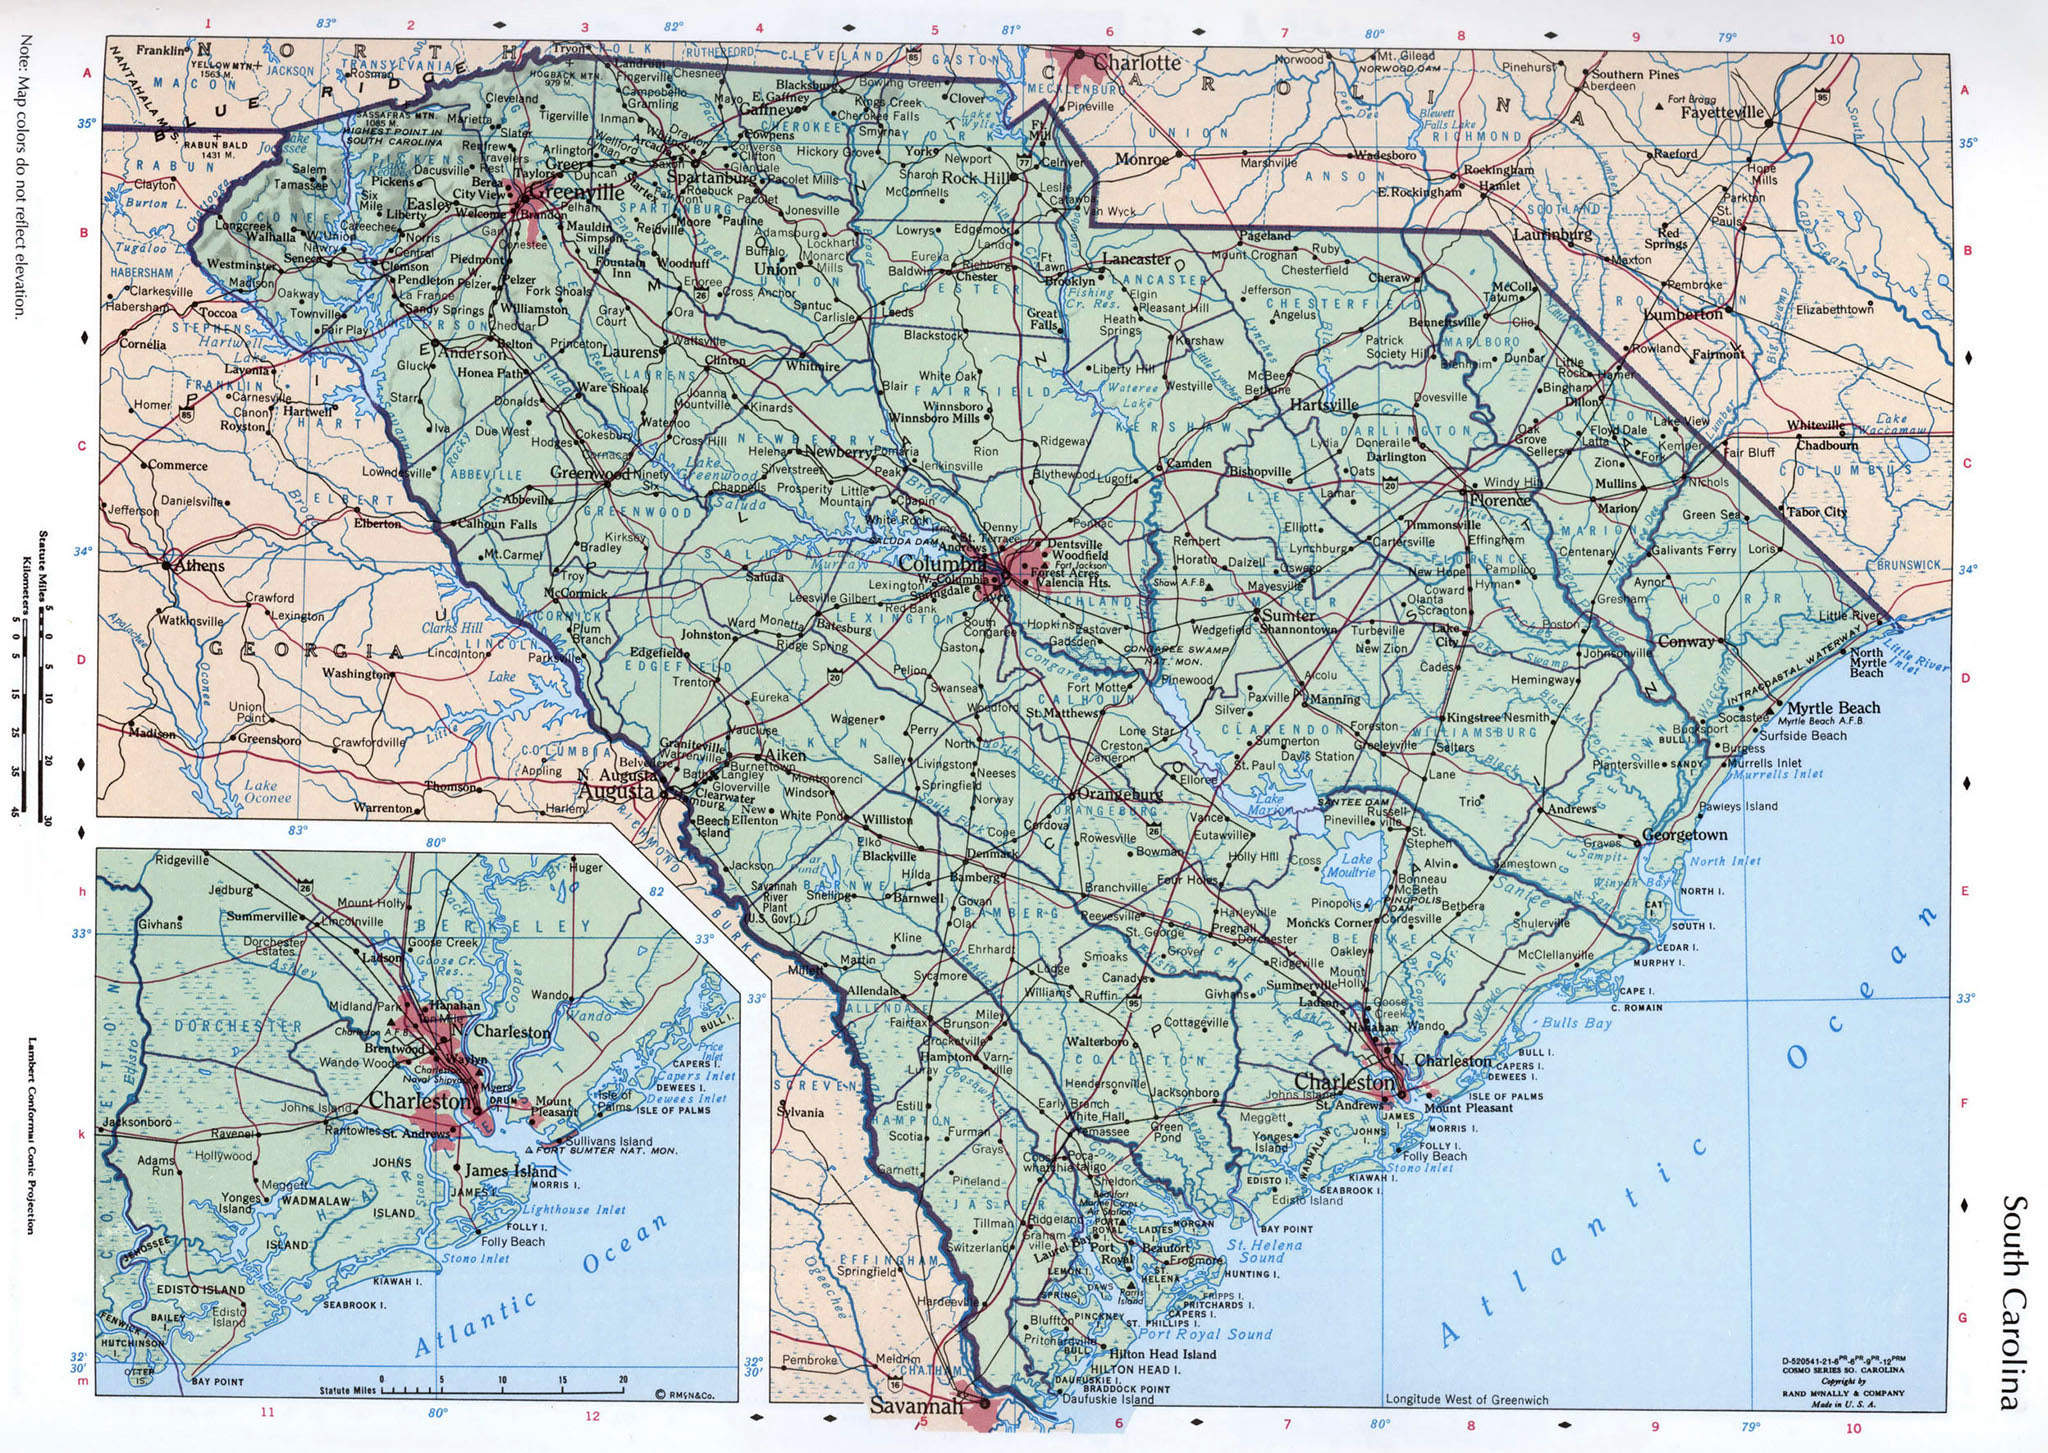 Large map of the state of South Carolina with cities, roads and